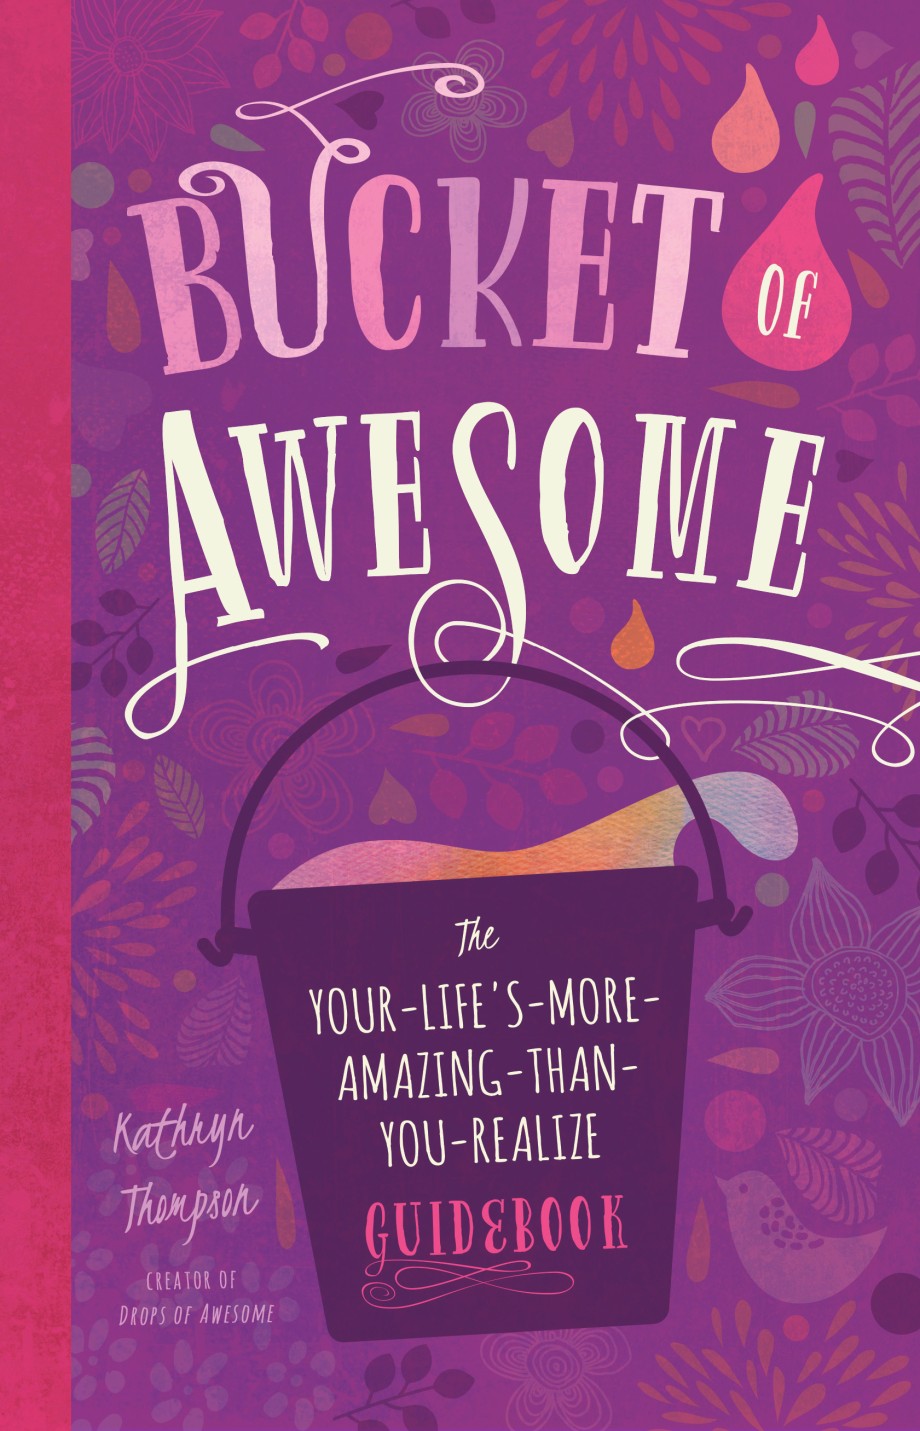 Bucket of Awesome The Your-Life's-More-Amazing-Than-You-Realize Guidebook